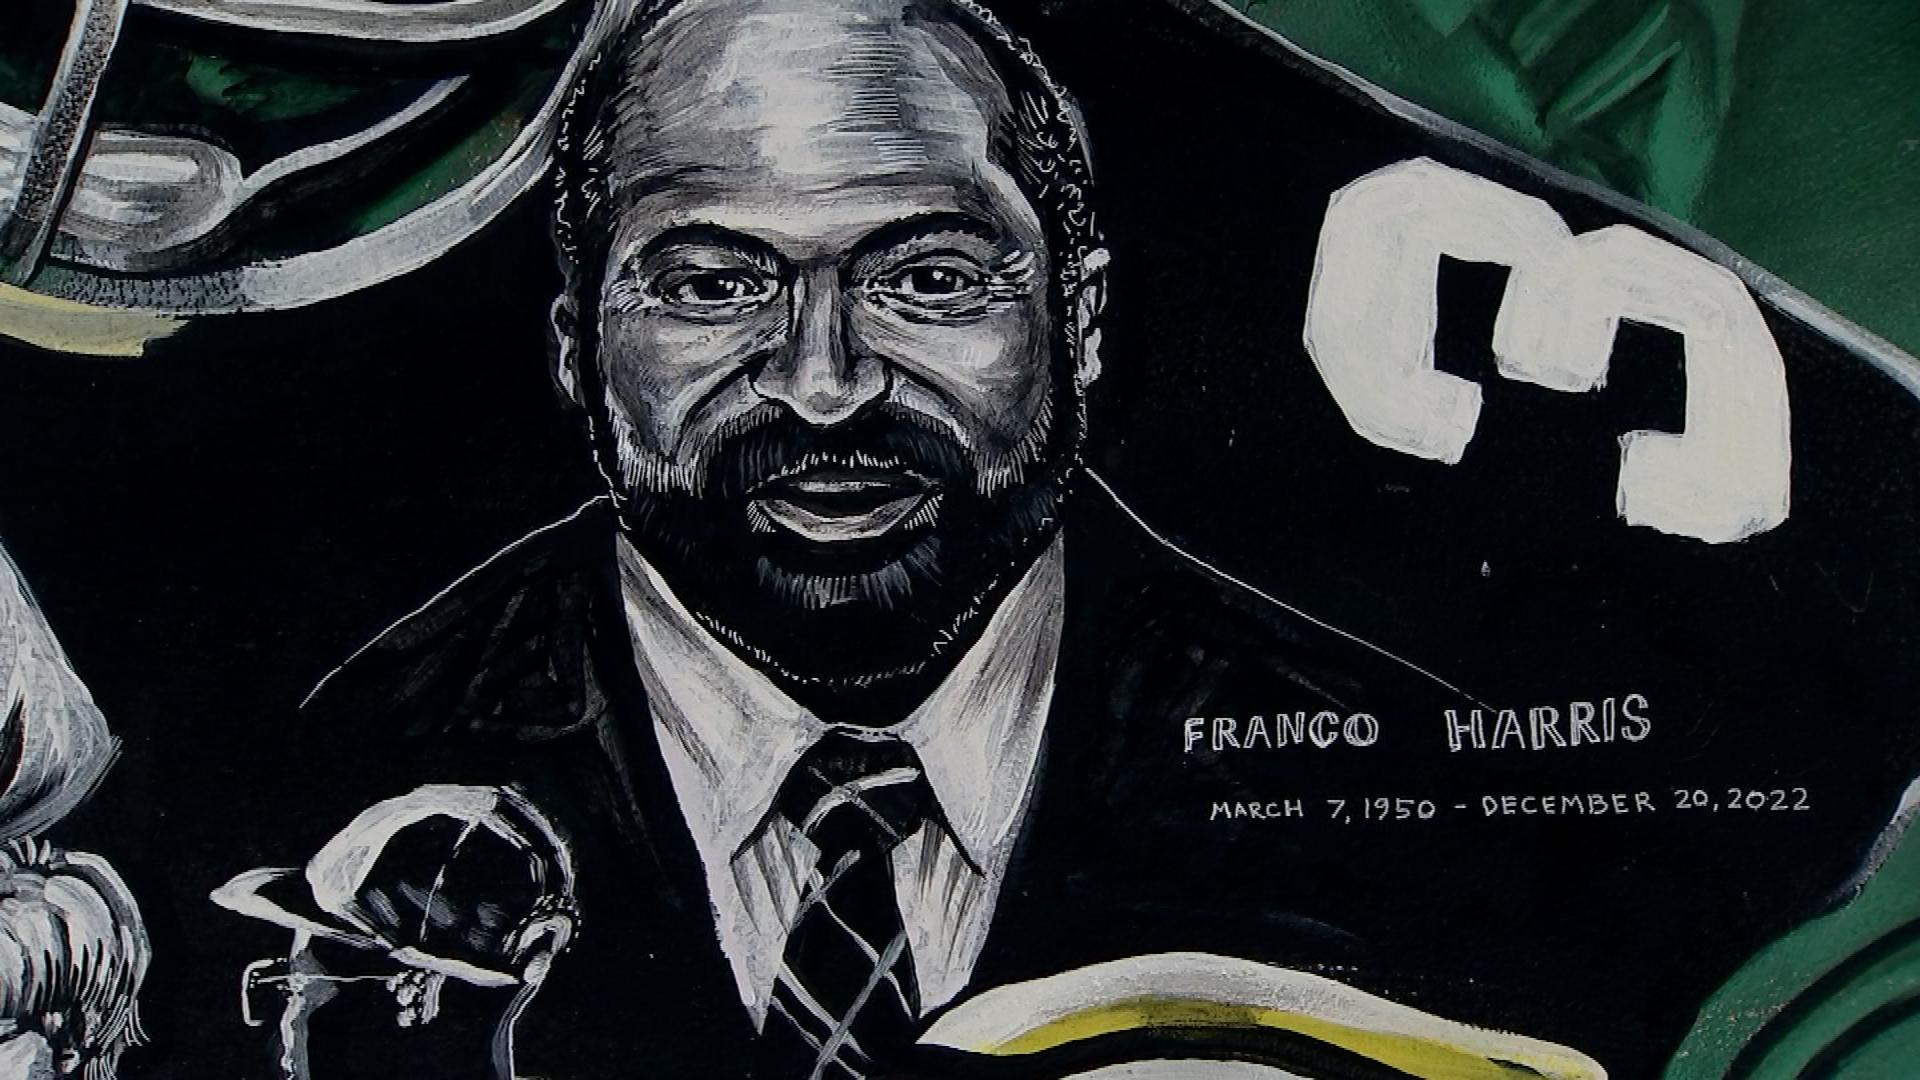 Mural at Monroeville Mall pays tribute to Franco Harris, Mac Miller